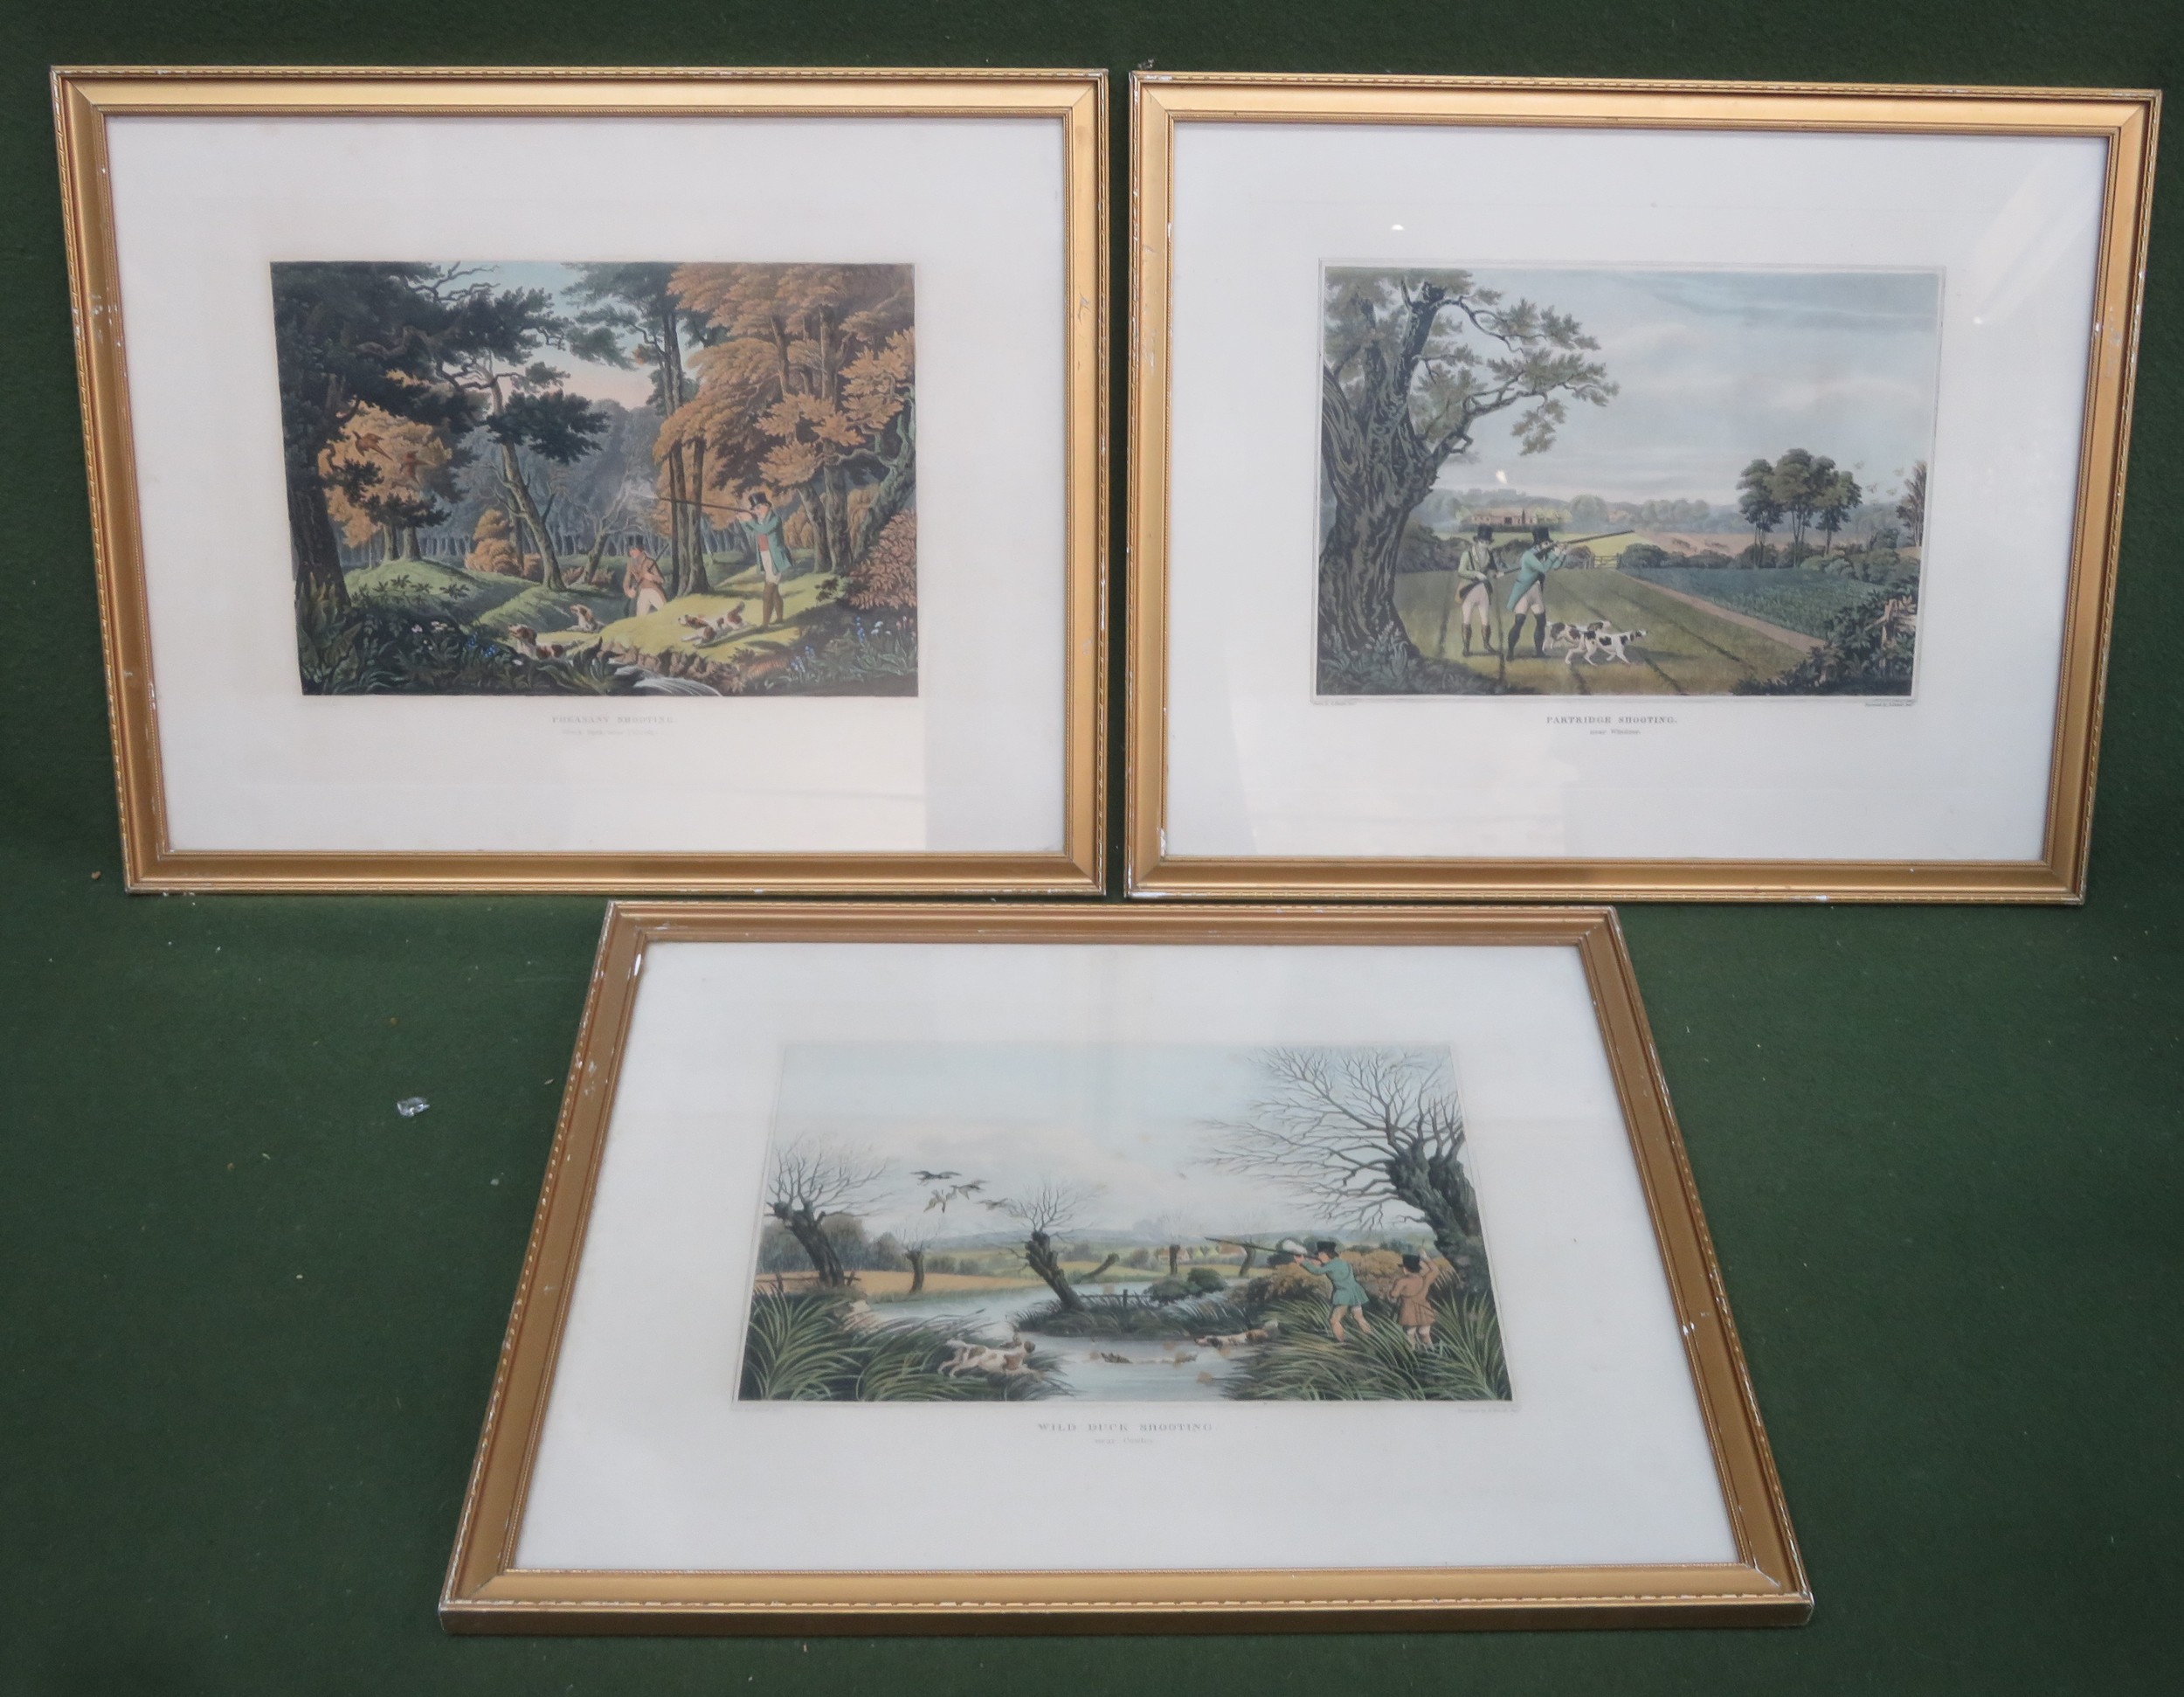 Set of Three R. Havell framed polychrome engravings depicting shooting scenes. Approx. 36 x 45